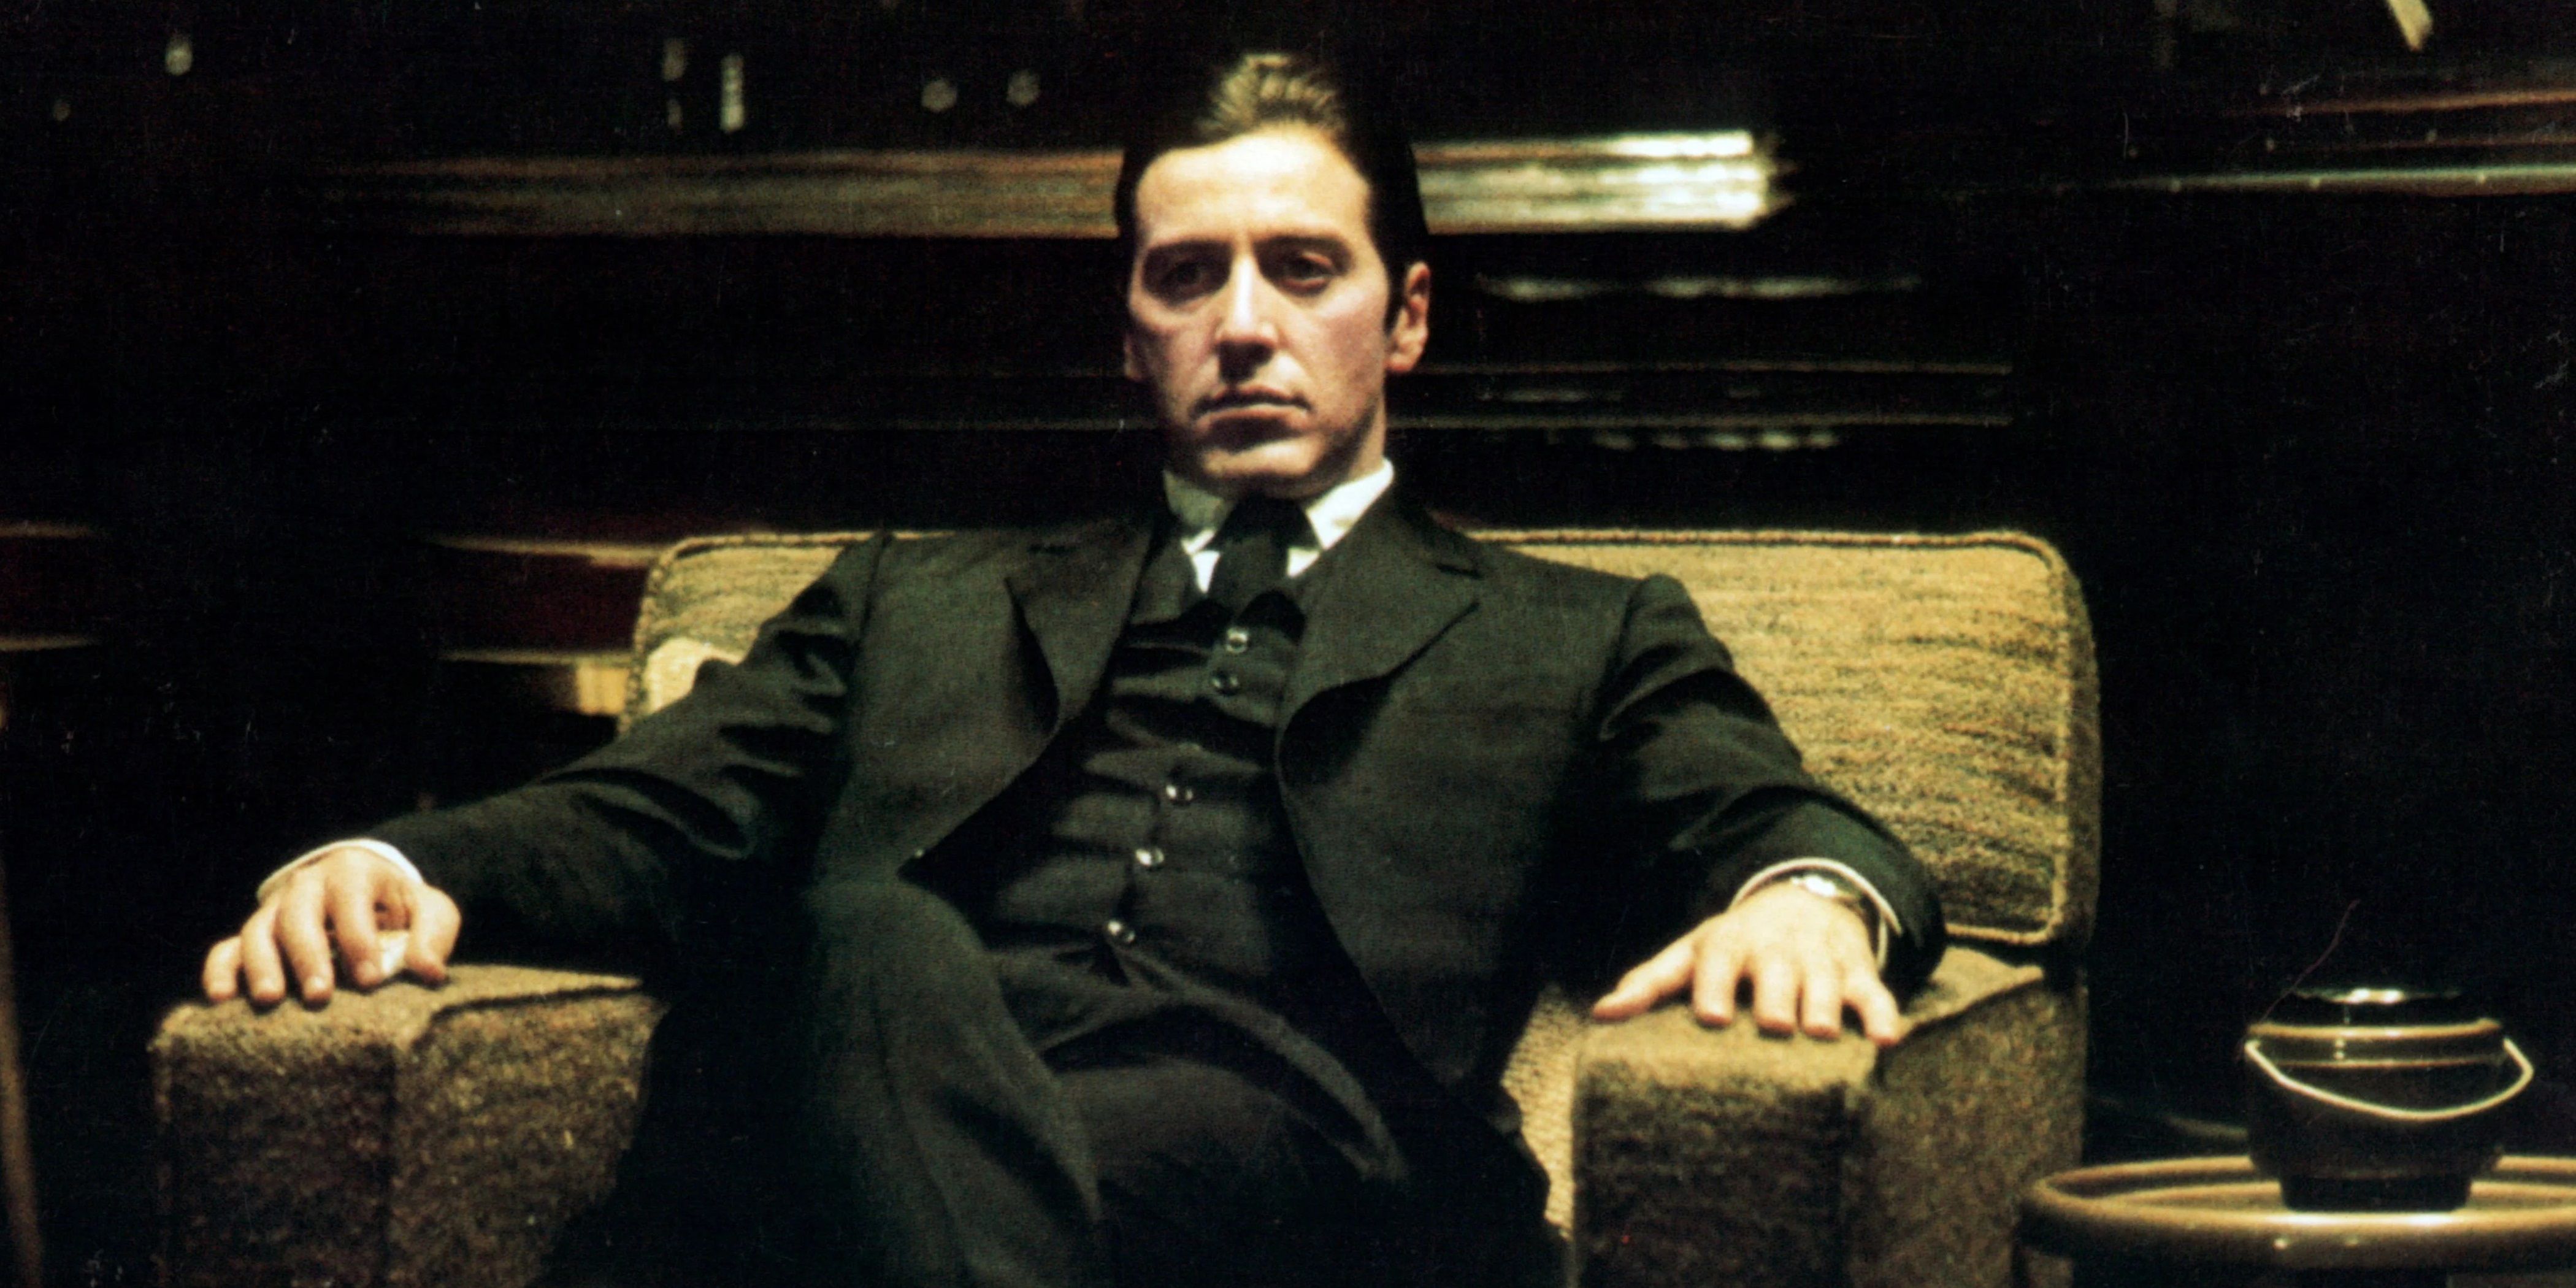 Al Pacino as Michael Corleone sitting in a chair in The Godfather Part II